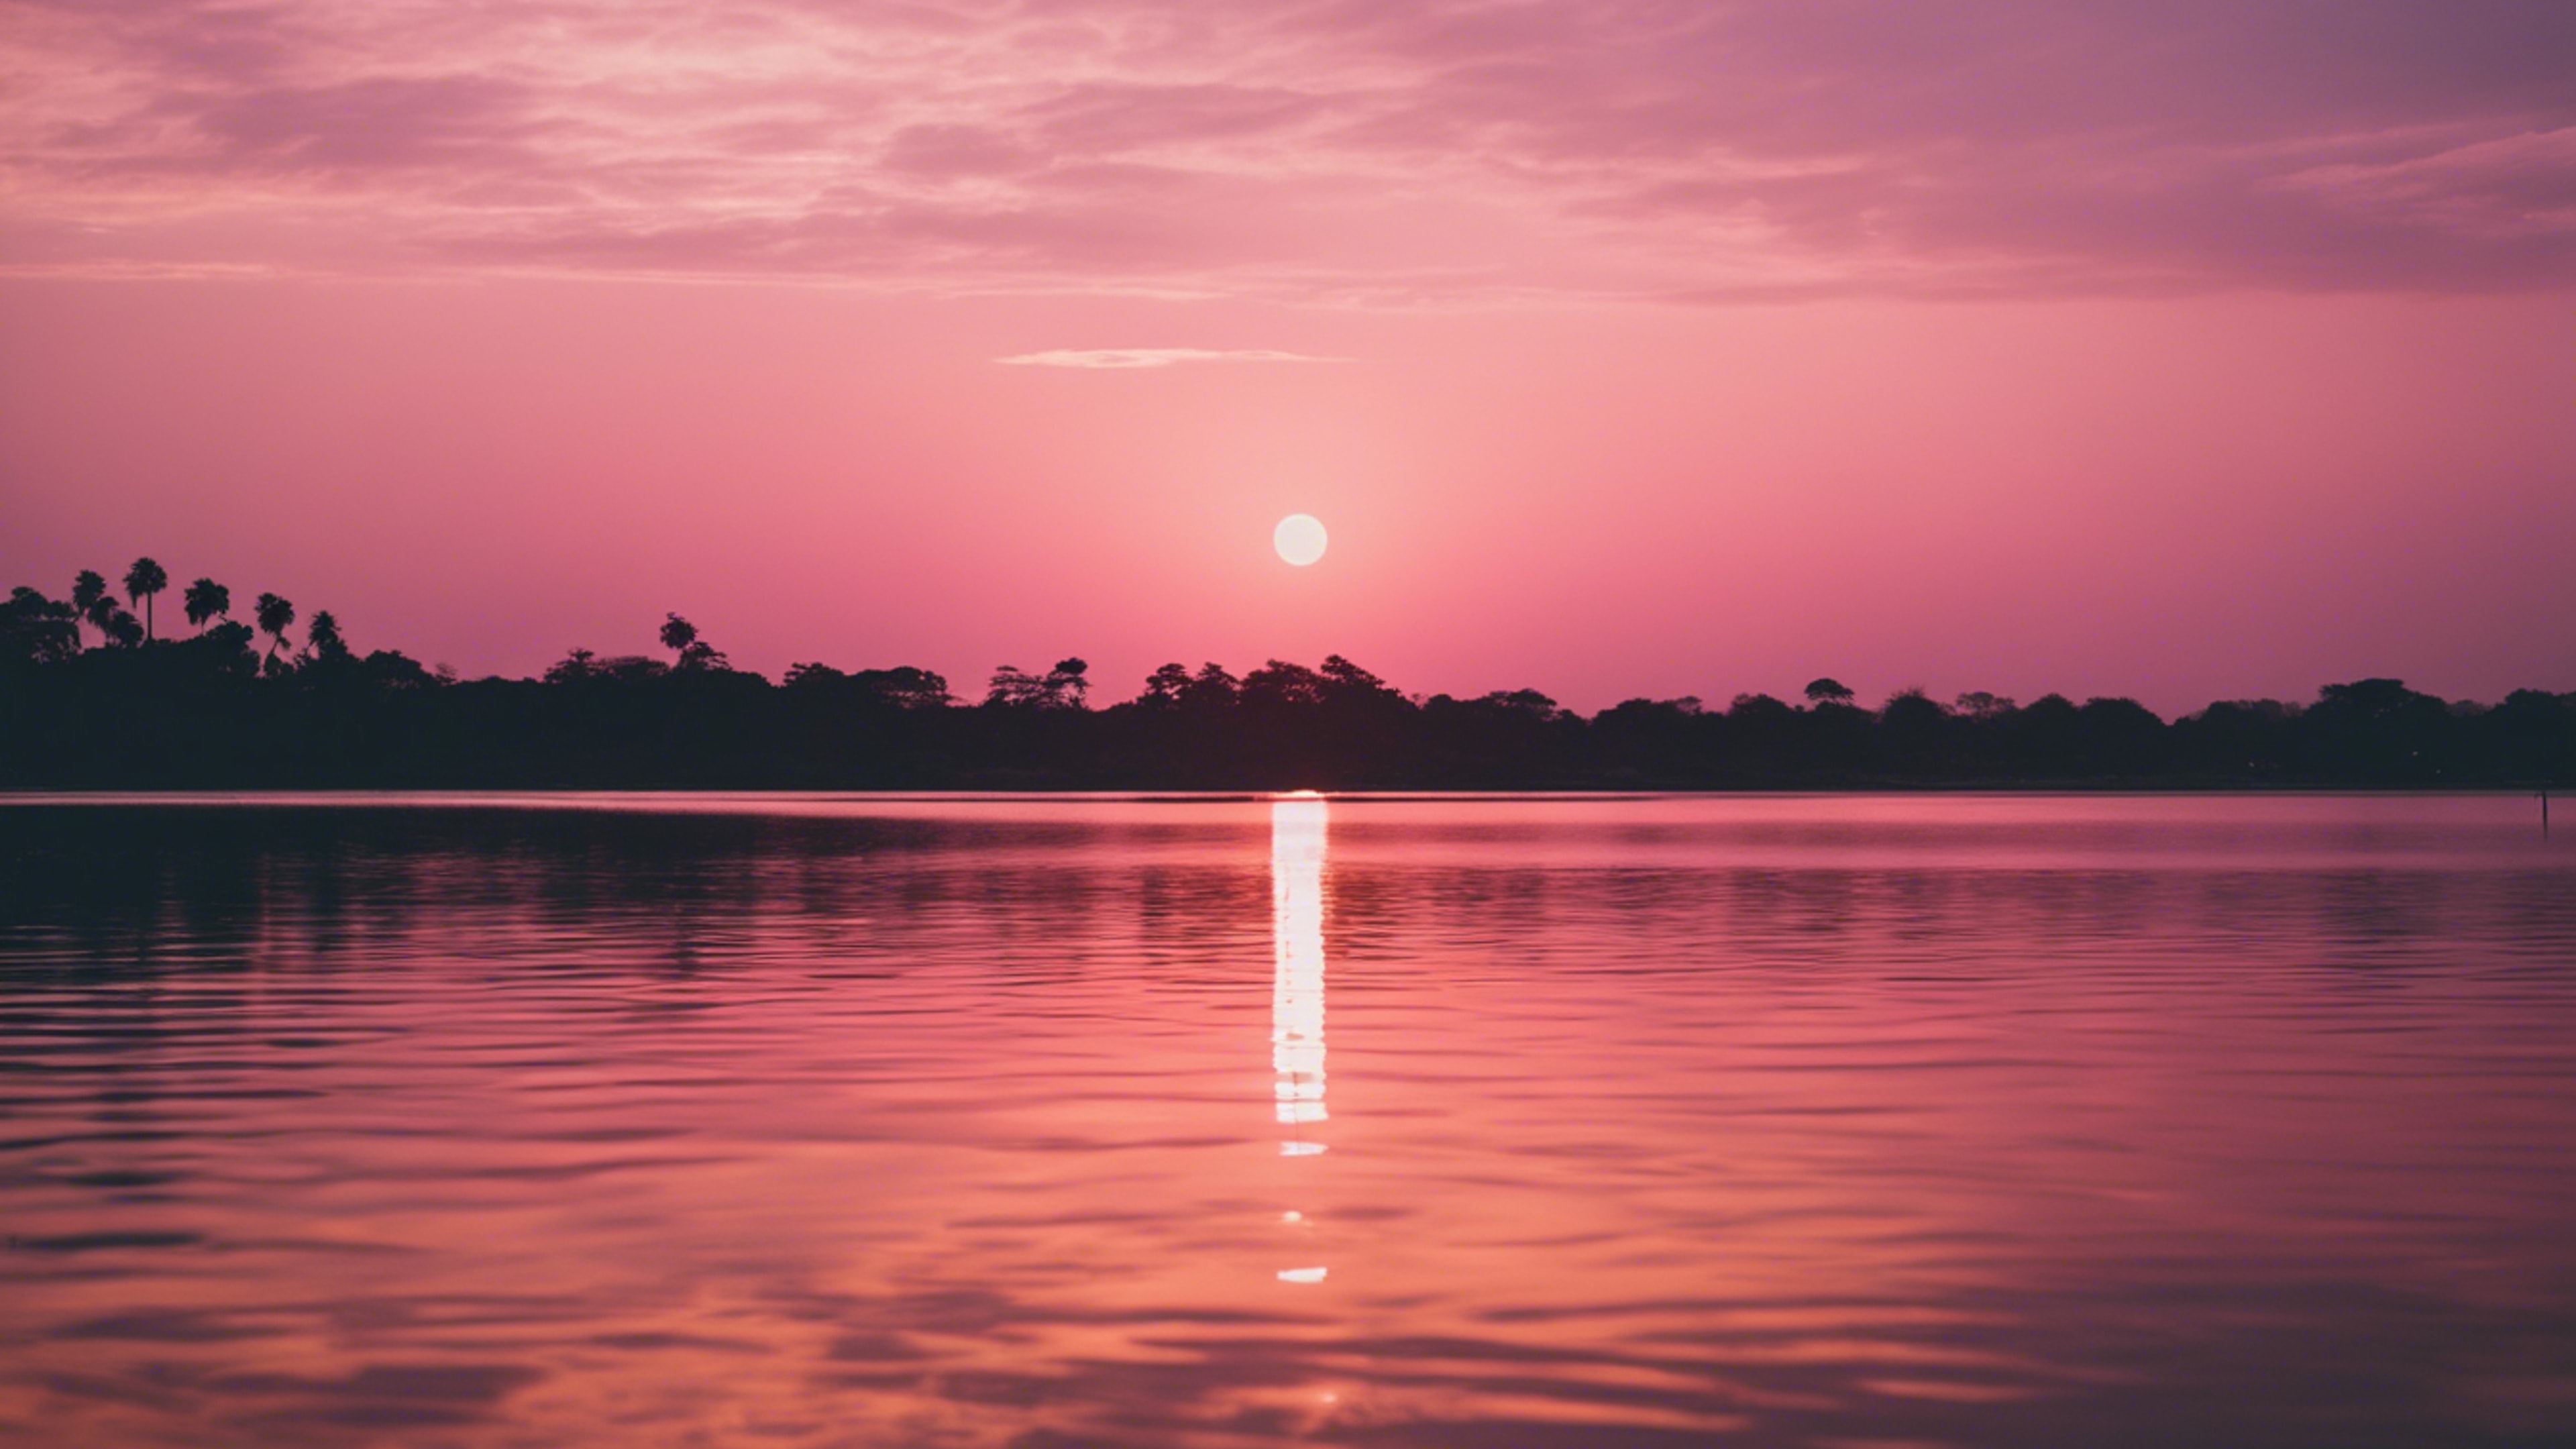 A picturesque pink and gold sunset reflecting on tranquil lagoon waters. 墙纸[938883e46b5847a4931b]